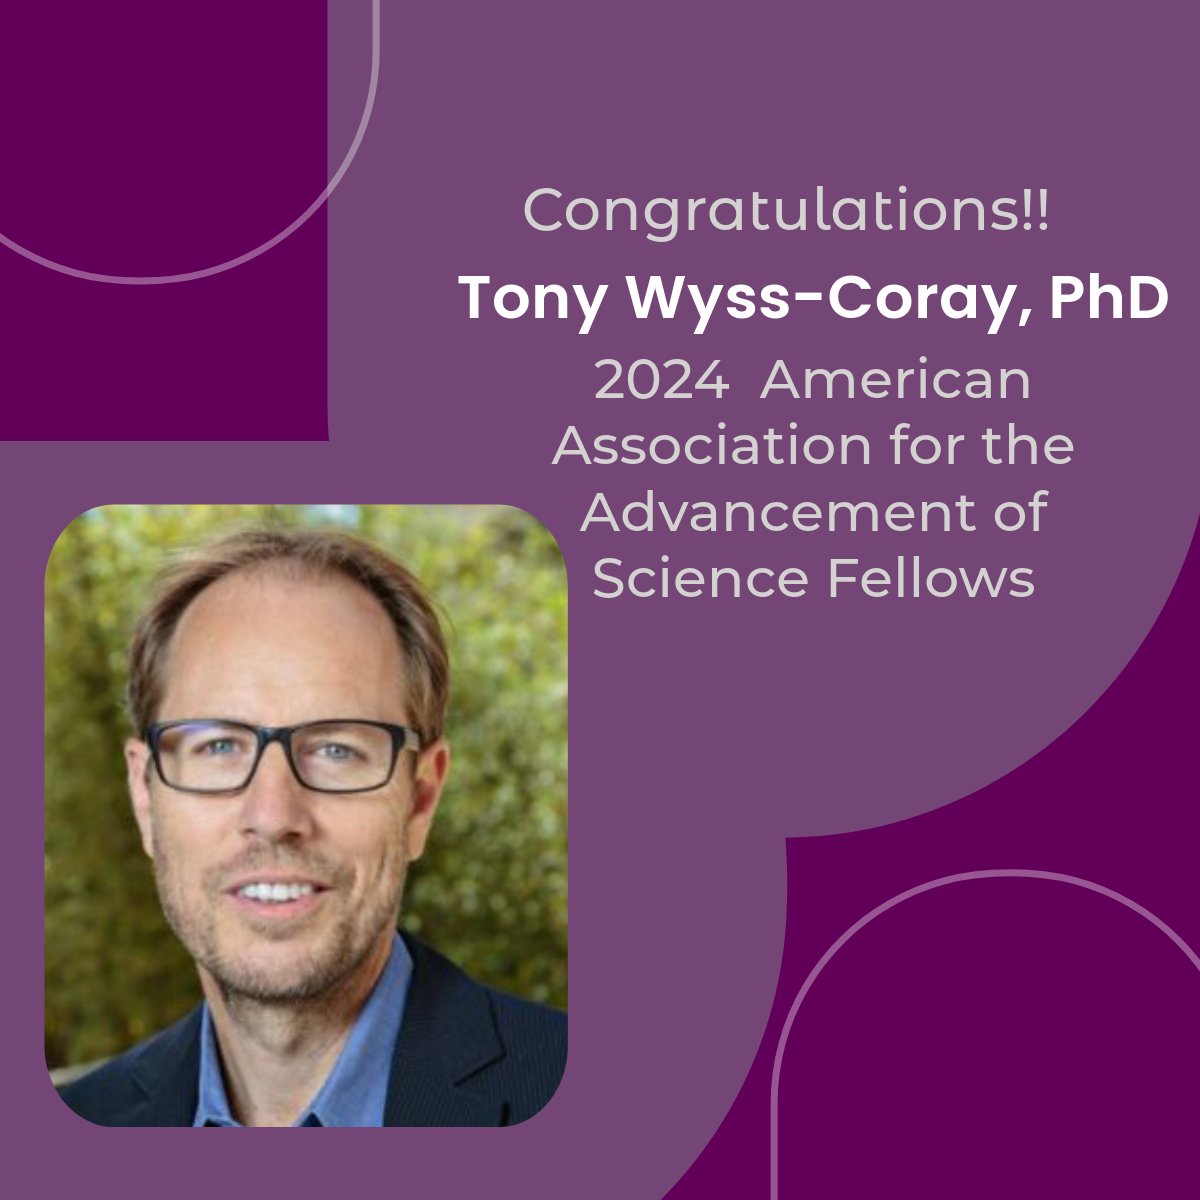 Congratulations to faculty members Bali Pulendran PhD & Tony Wyss-Coray PhD on their AAAS Fellowships. Learn more about their research and contributions in Stanford Report: news.stanford.edu/report/2024/04…
#StanfordBiosciences #FacultyFellows  #Biosciences